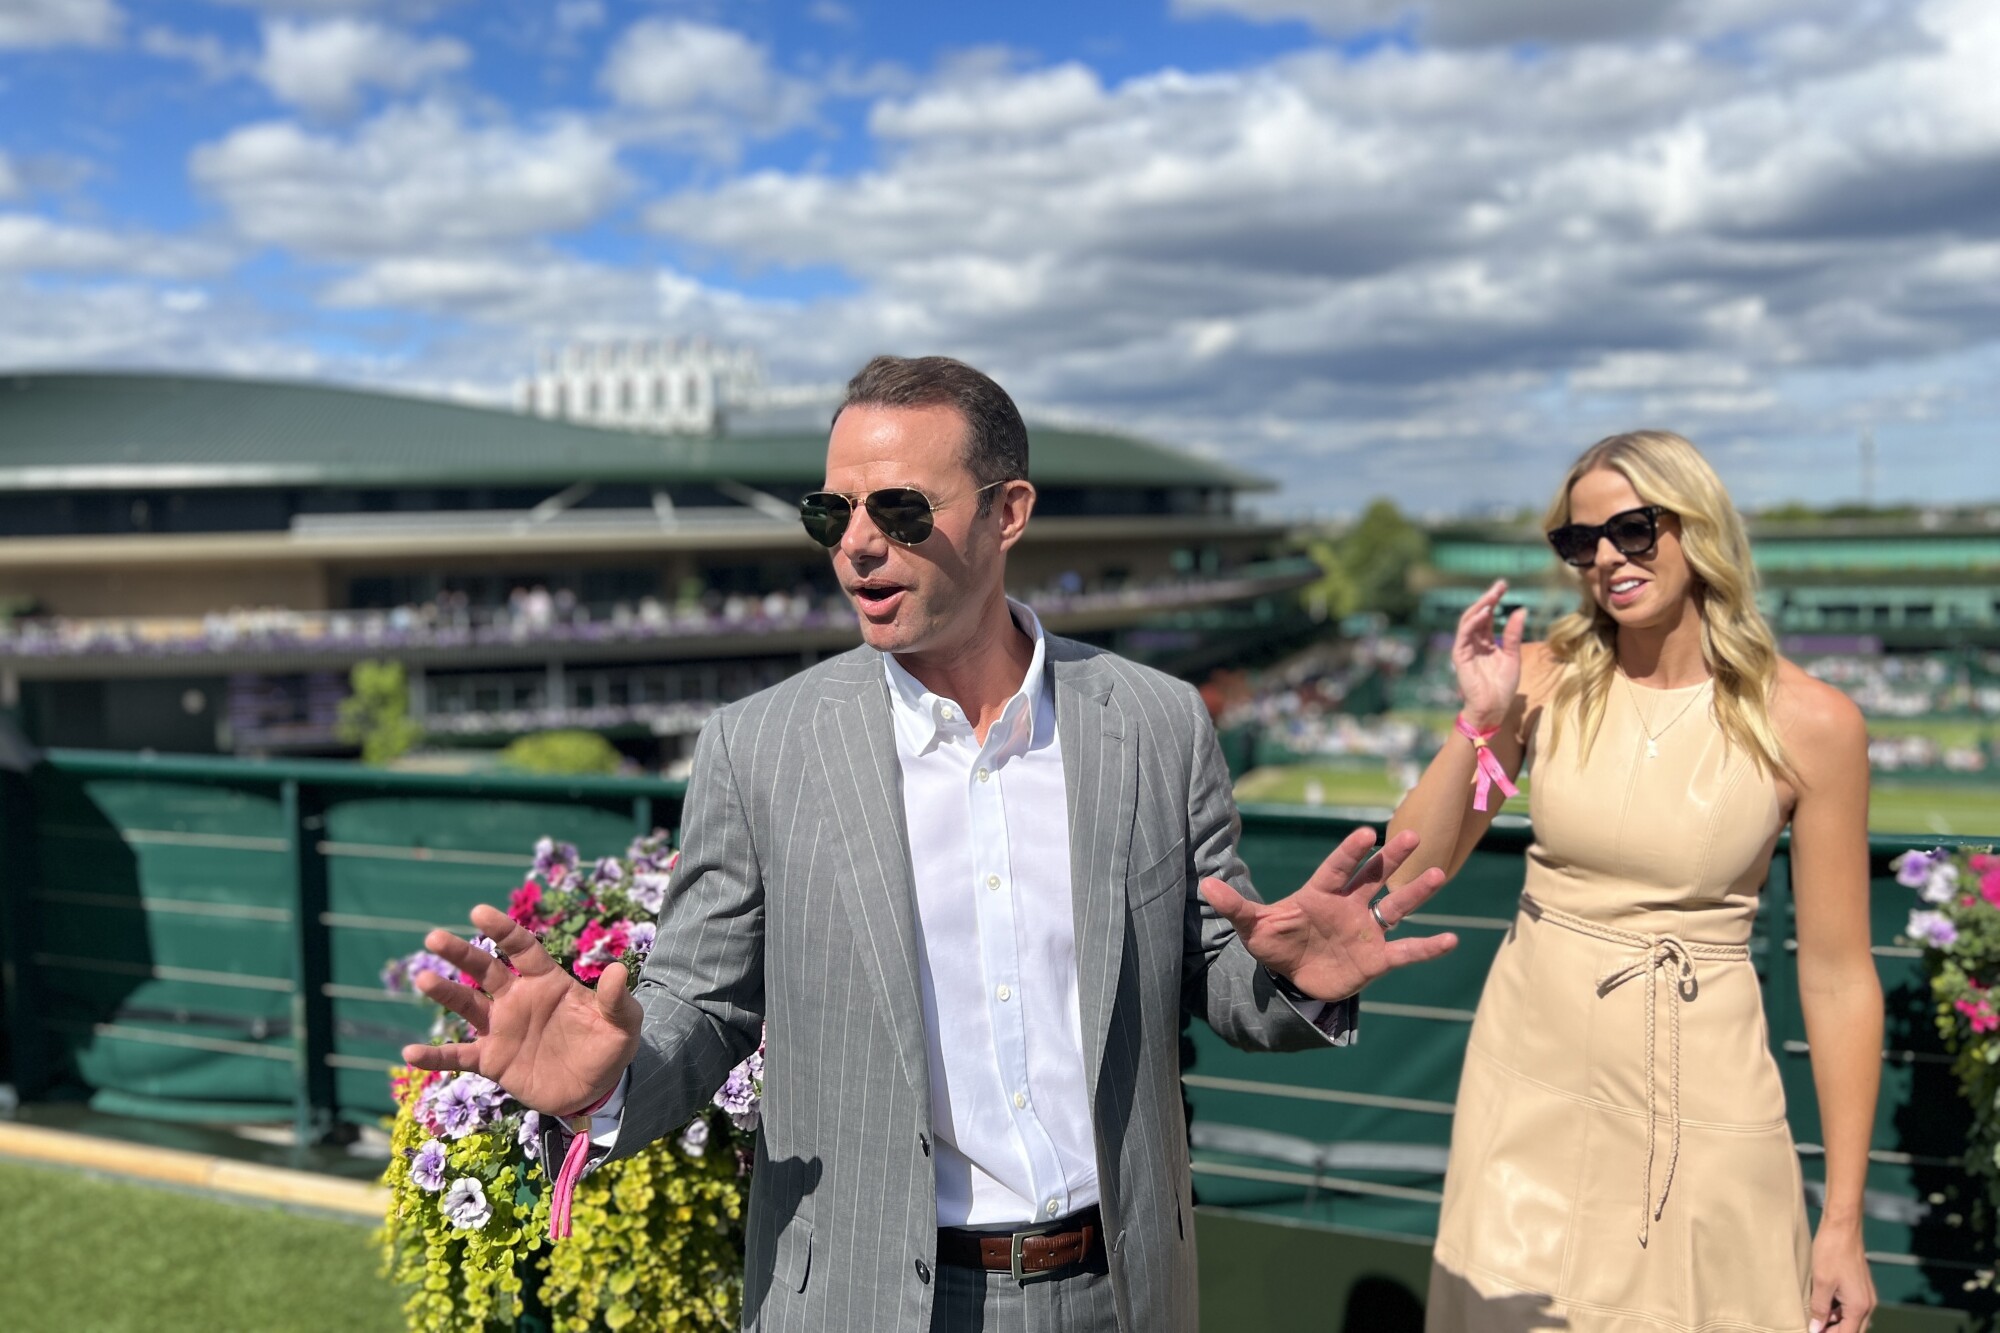 Brandon Staley and his wife at Wimbledon.